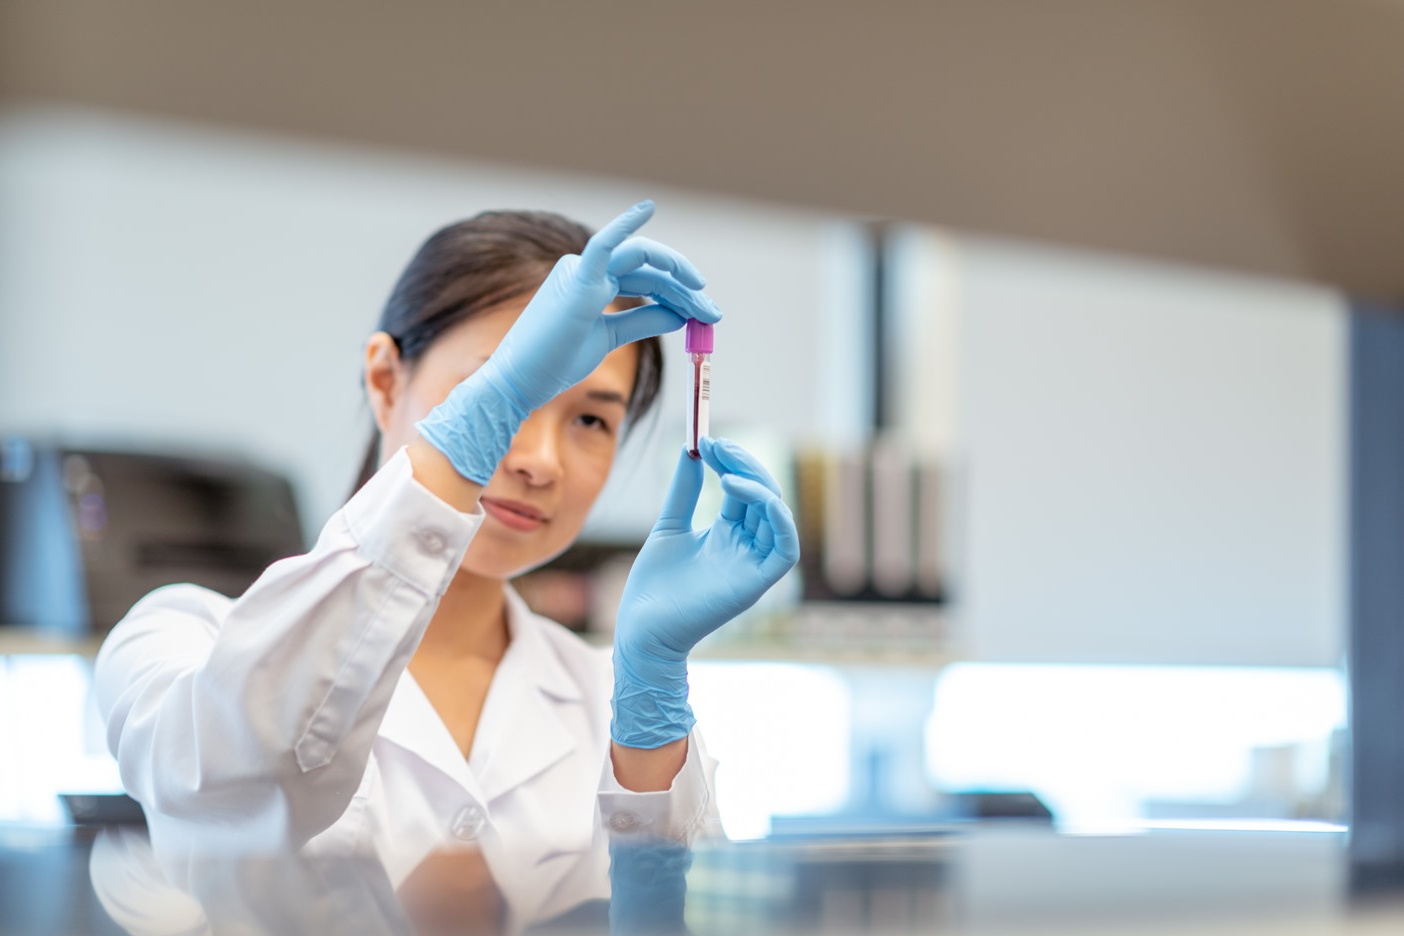 A female chemist is working solo in lab. The woman is holding up a small vial of blood and is analyzing the medical sample. She is wearing a lab coat and protective gloves.